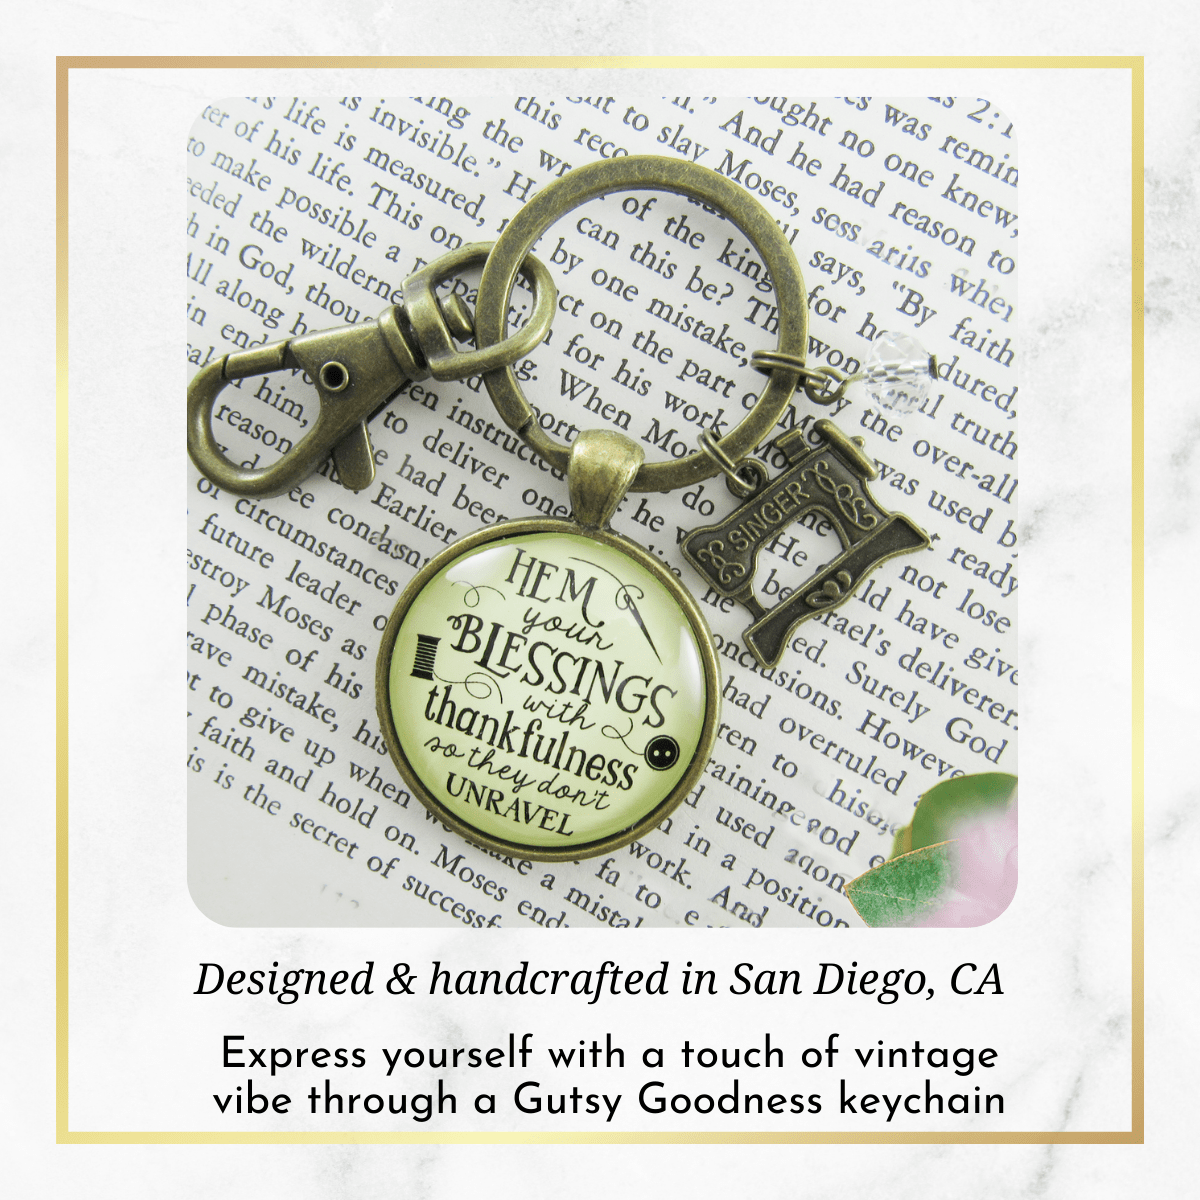 Seamstress Keychain Hem Your Blessings Thankful Grateful Womens Vintage Sewing Jewelry Gift - Gutsy Goodness Handmade Jewelry;Seamstress Keychain Hem Your Blessings Thankful Grateful Womens Vintage Sewing Jewelry Gift - Gutsy Goodness Handmade Jewelry Gifts